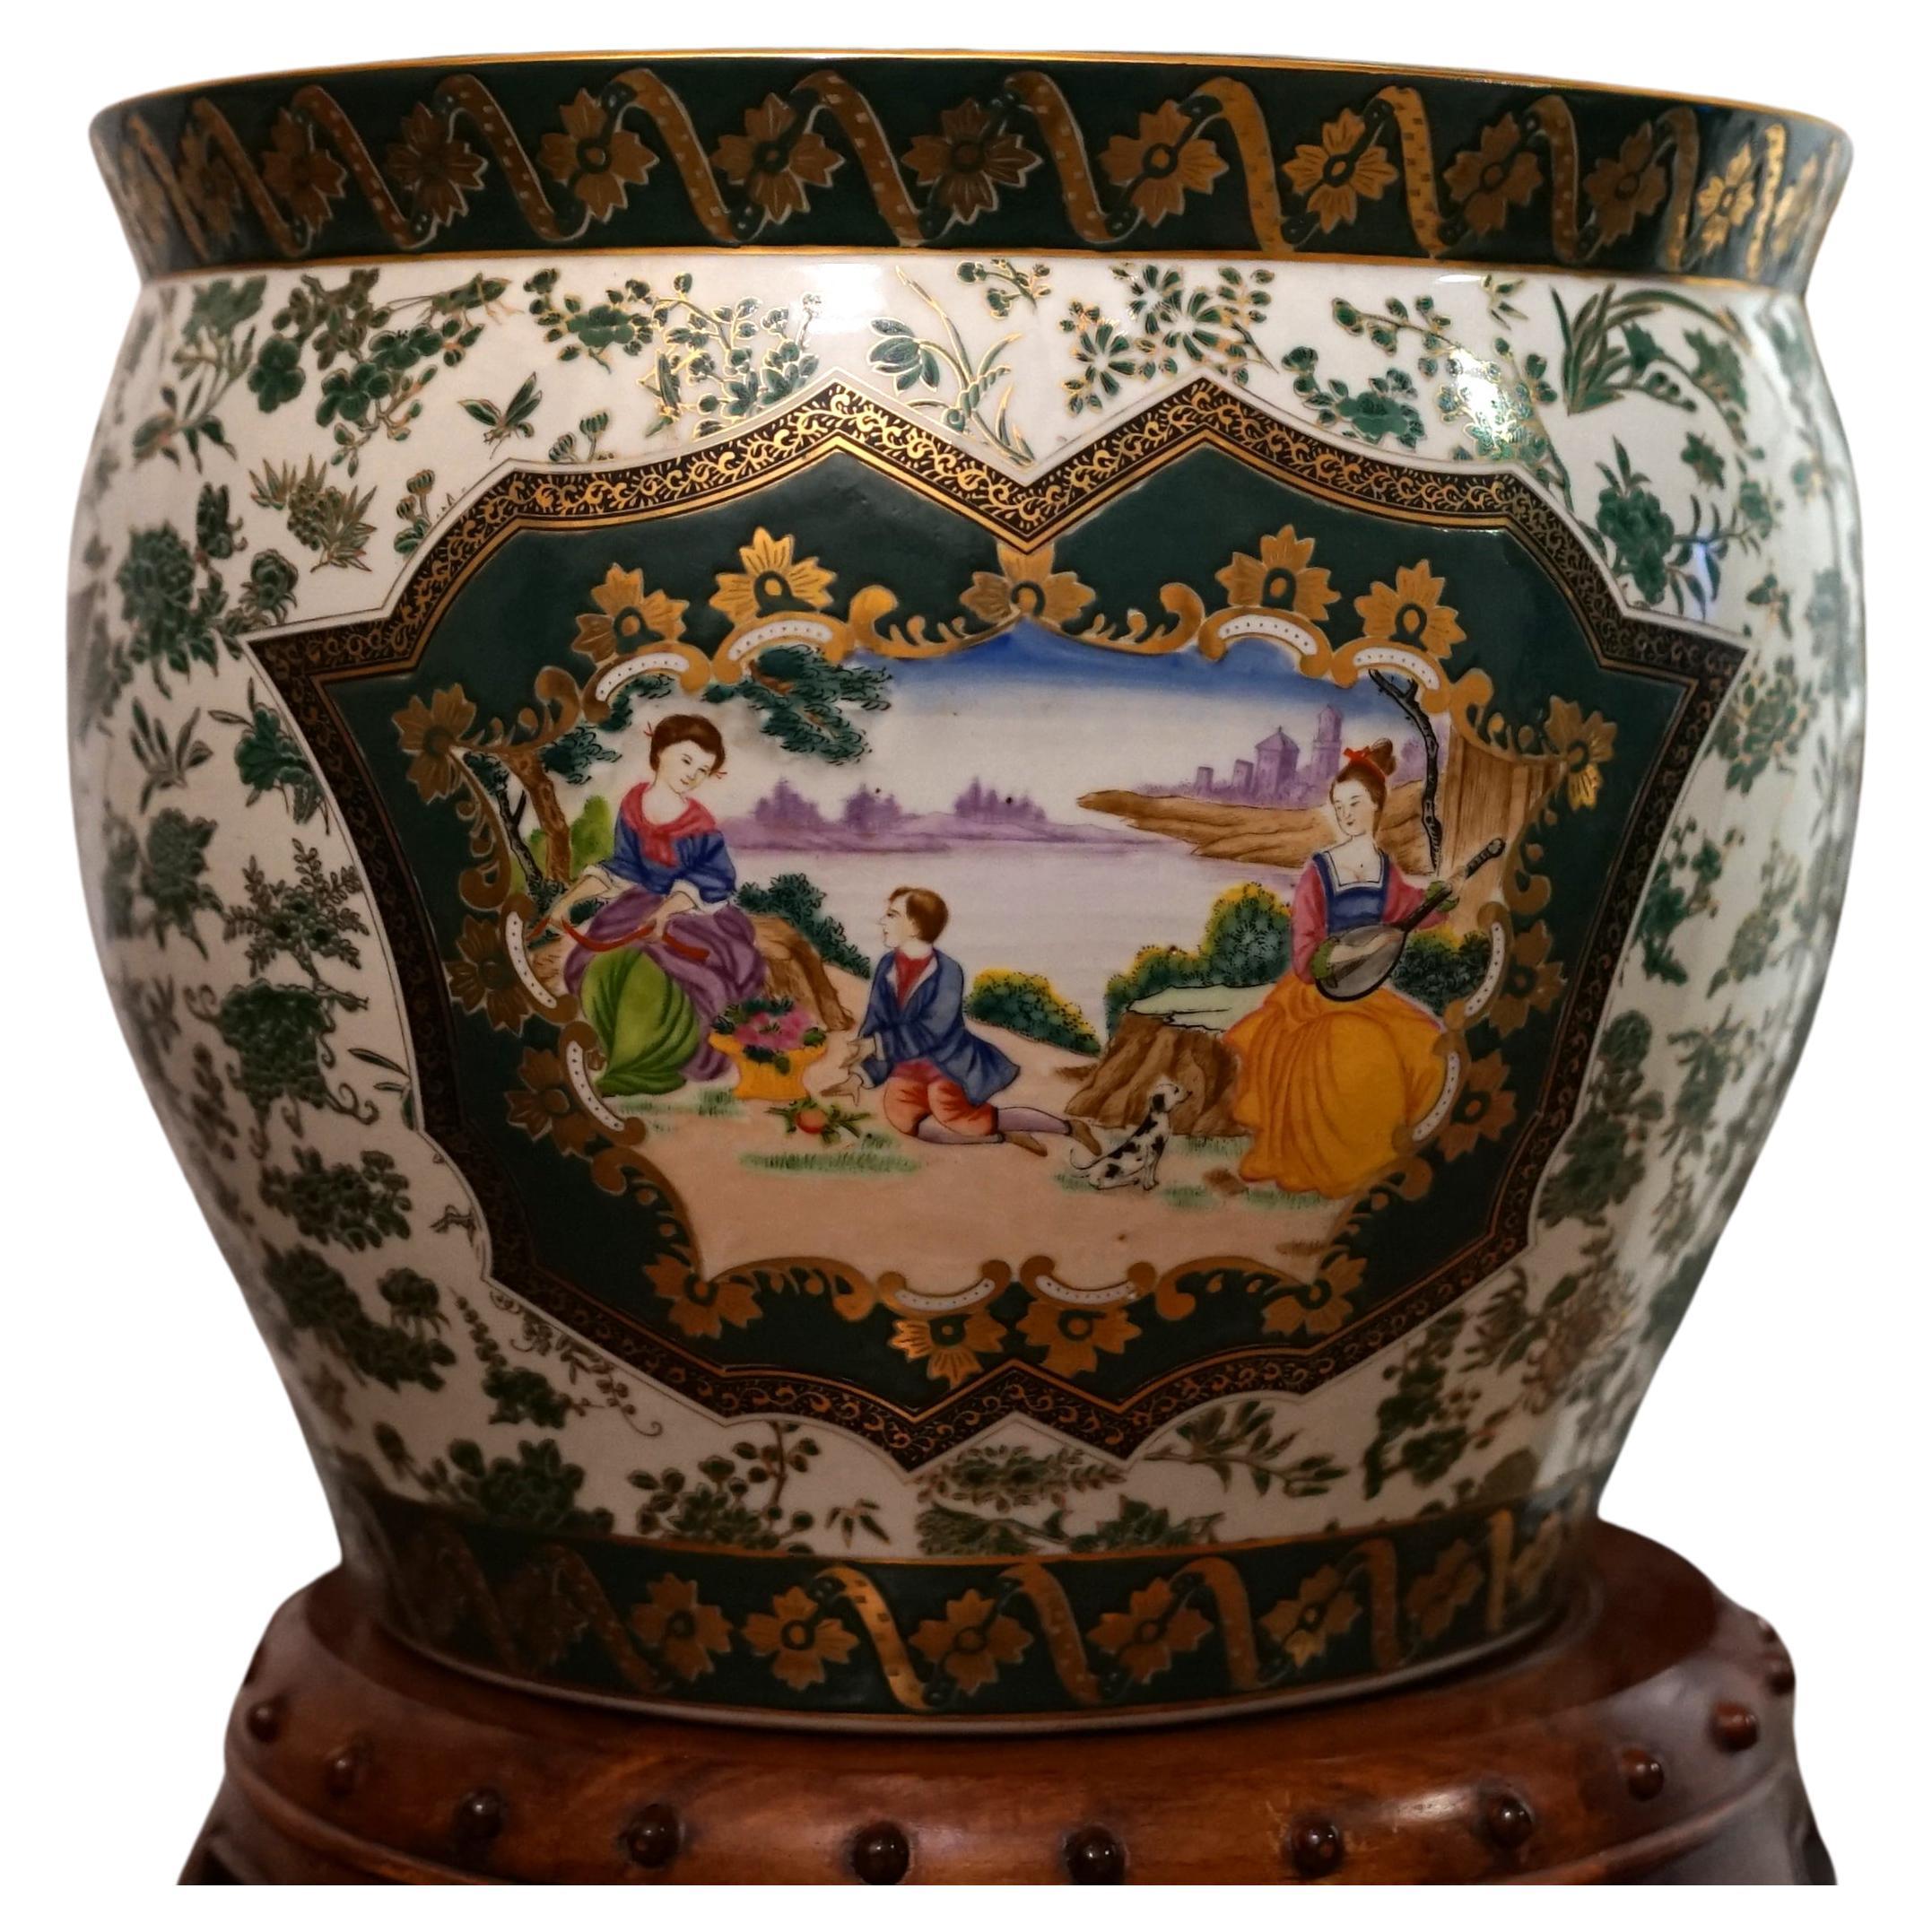 The gilt design and gold trim details as well as the deep green ground make this set of Canton Chinese jardinieres unique. This lovely pair of estate sale jardinieres has scenes on both sides of the pots. The pieces stand out overall with their